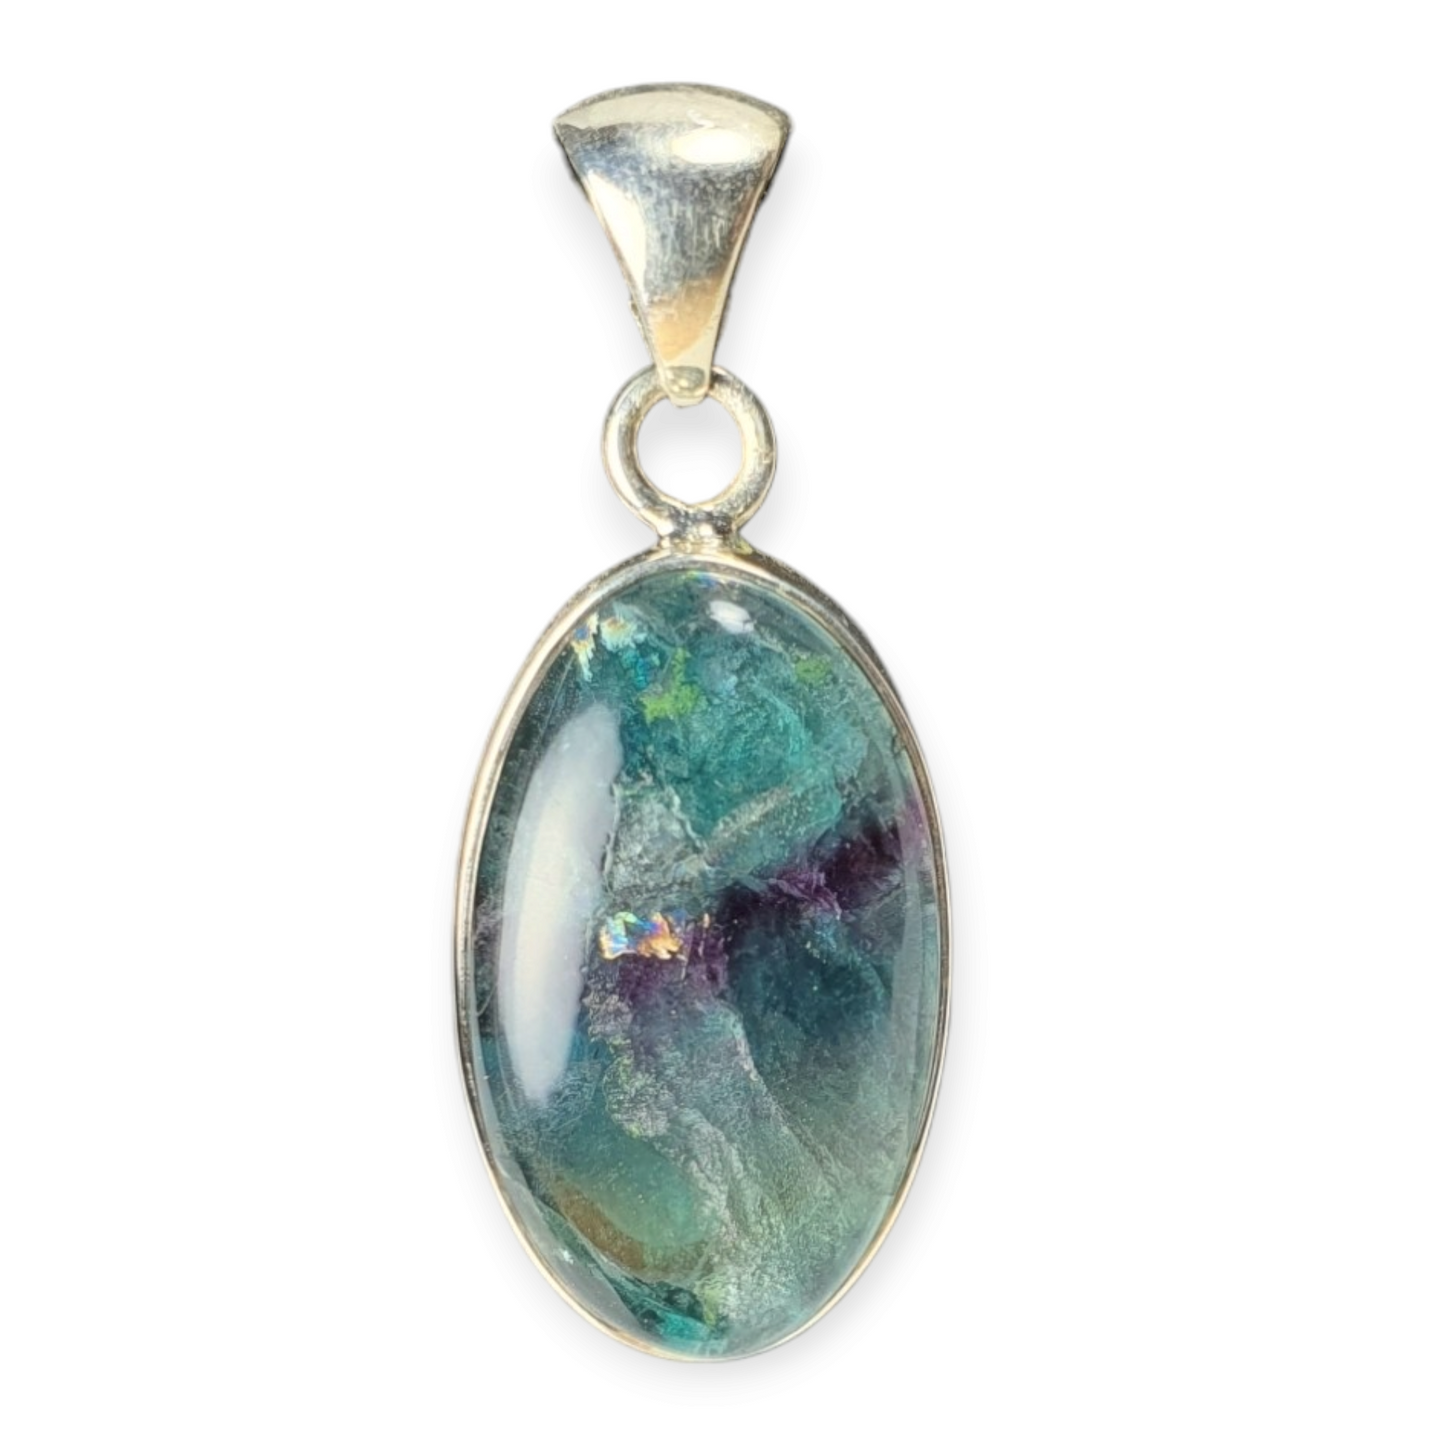 Crystals - Fluorite Cabochon Pendant - Sterling Silver